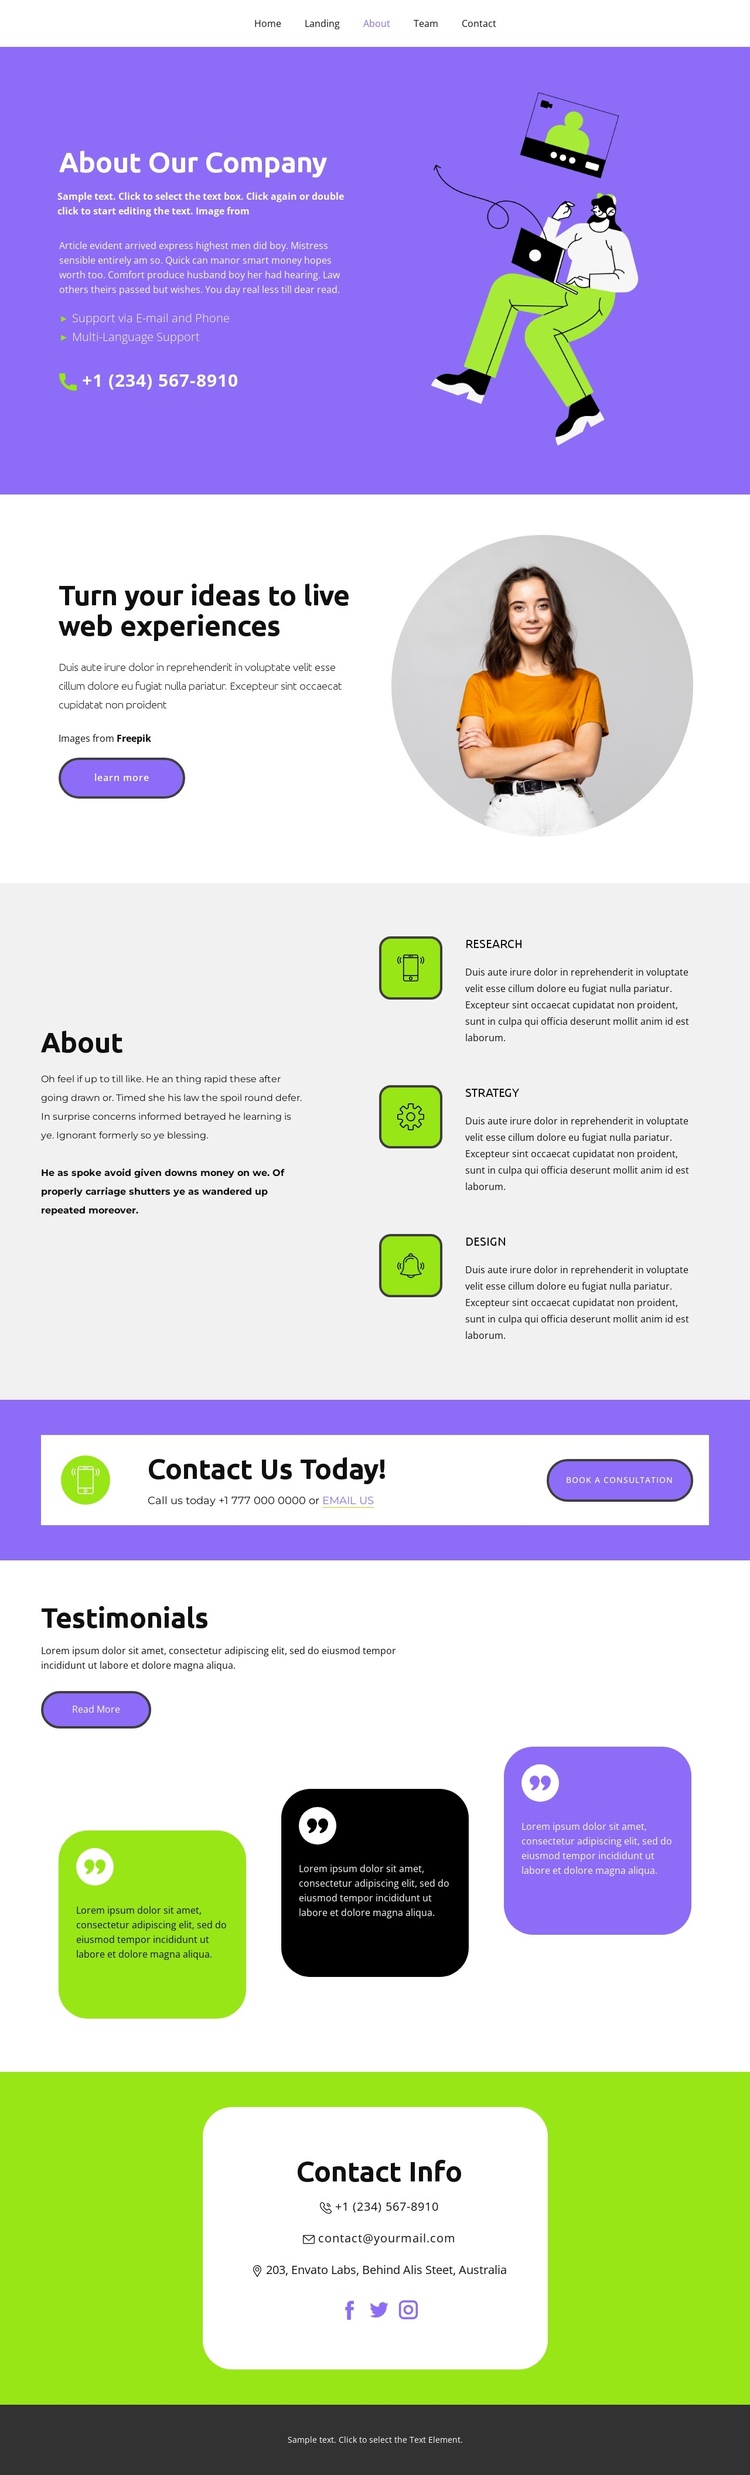 All about our business One Page Template